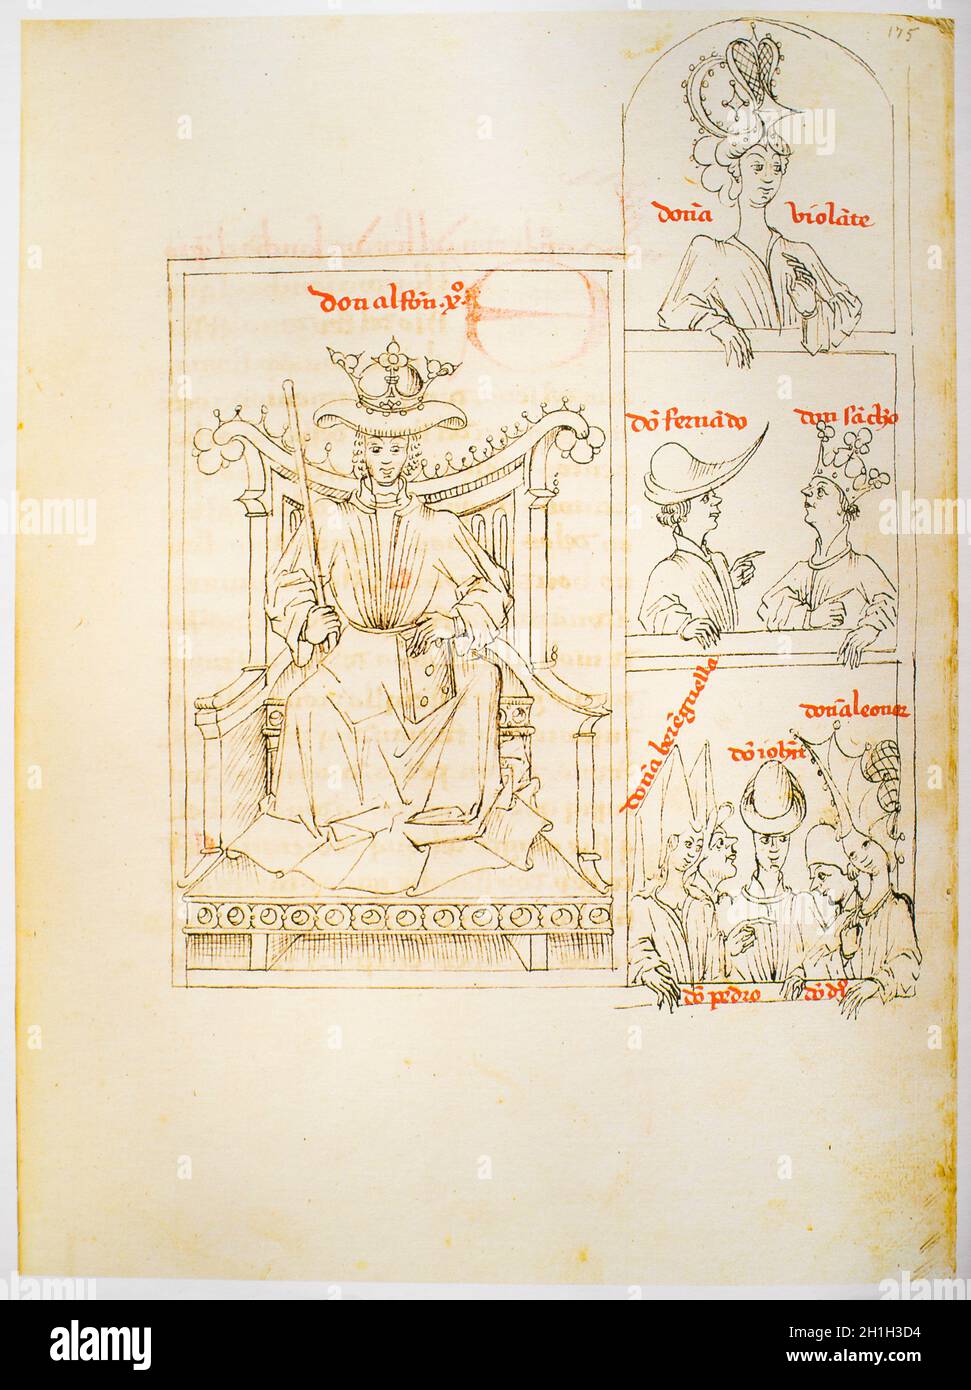 Alfonso X the Wise, king of Castile at Genealogy of the Kings of Spain by Alonso de Cartagena, 1456. Royal Library of Palace, Madrid. Folio 175r Stock Photo